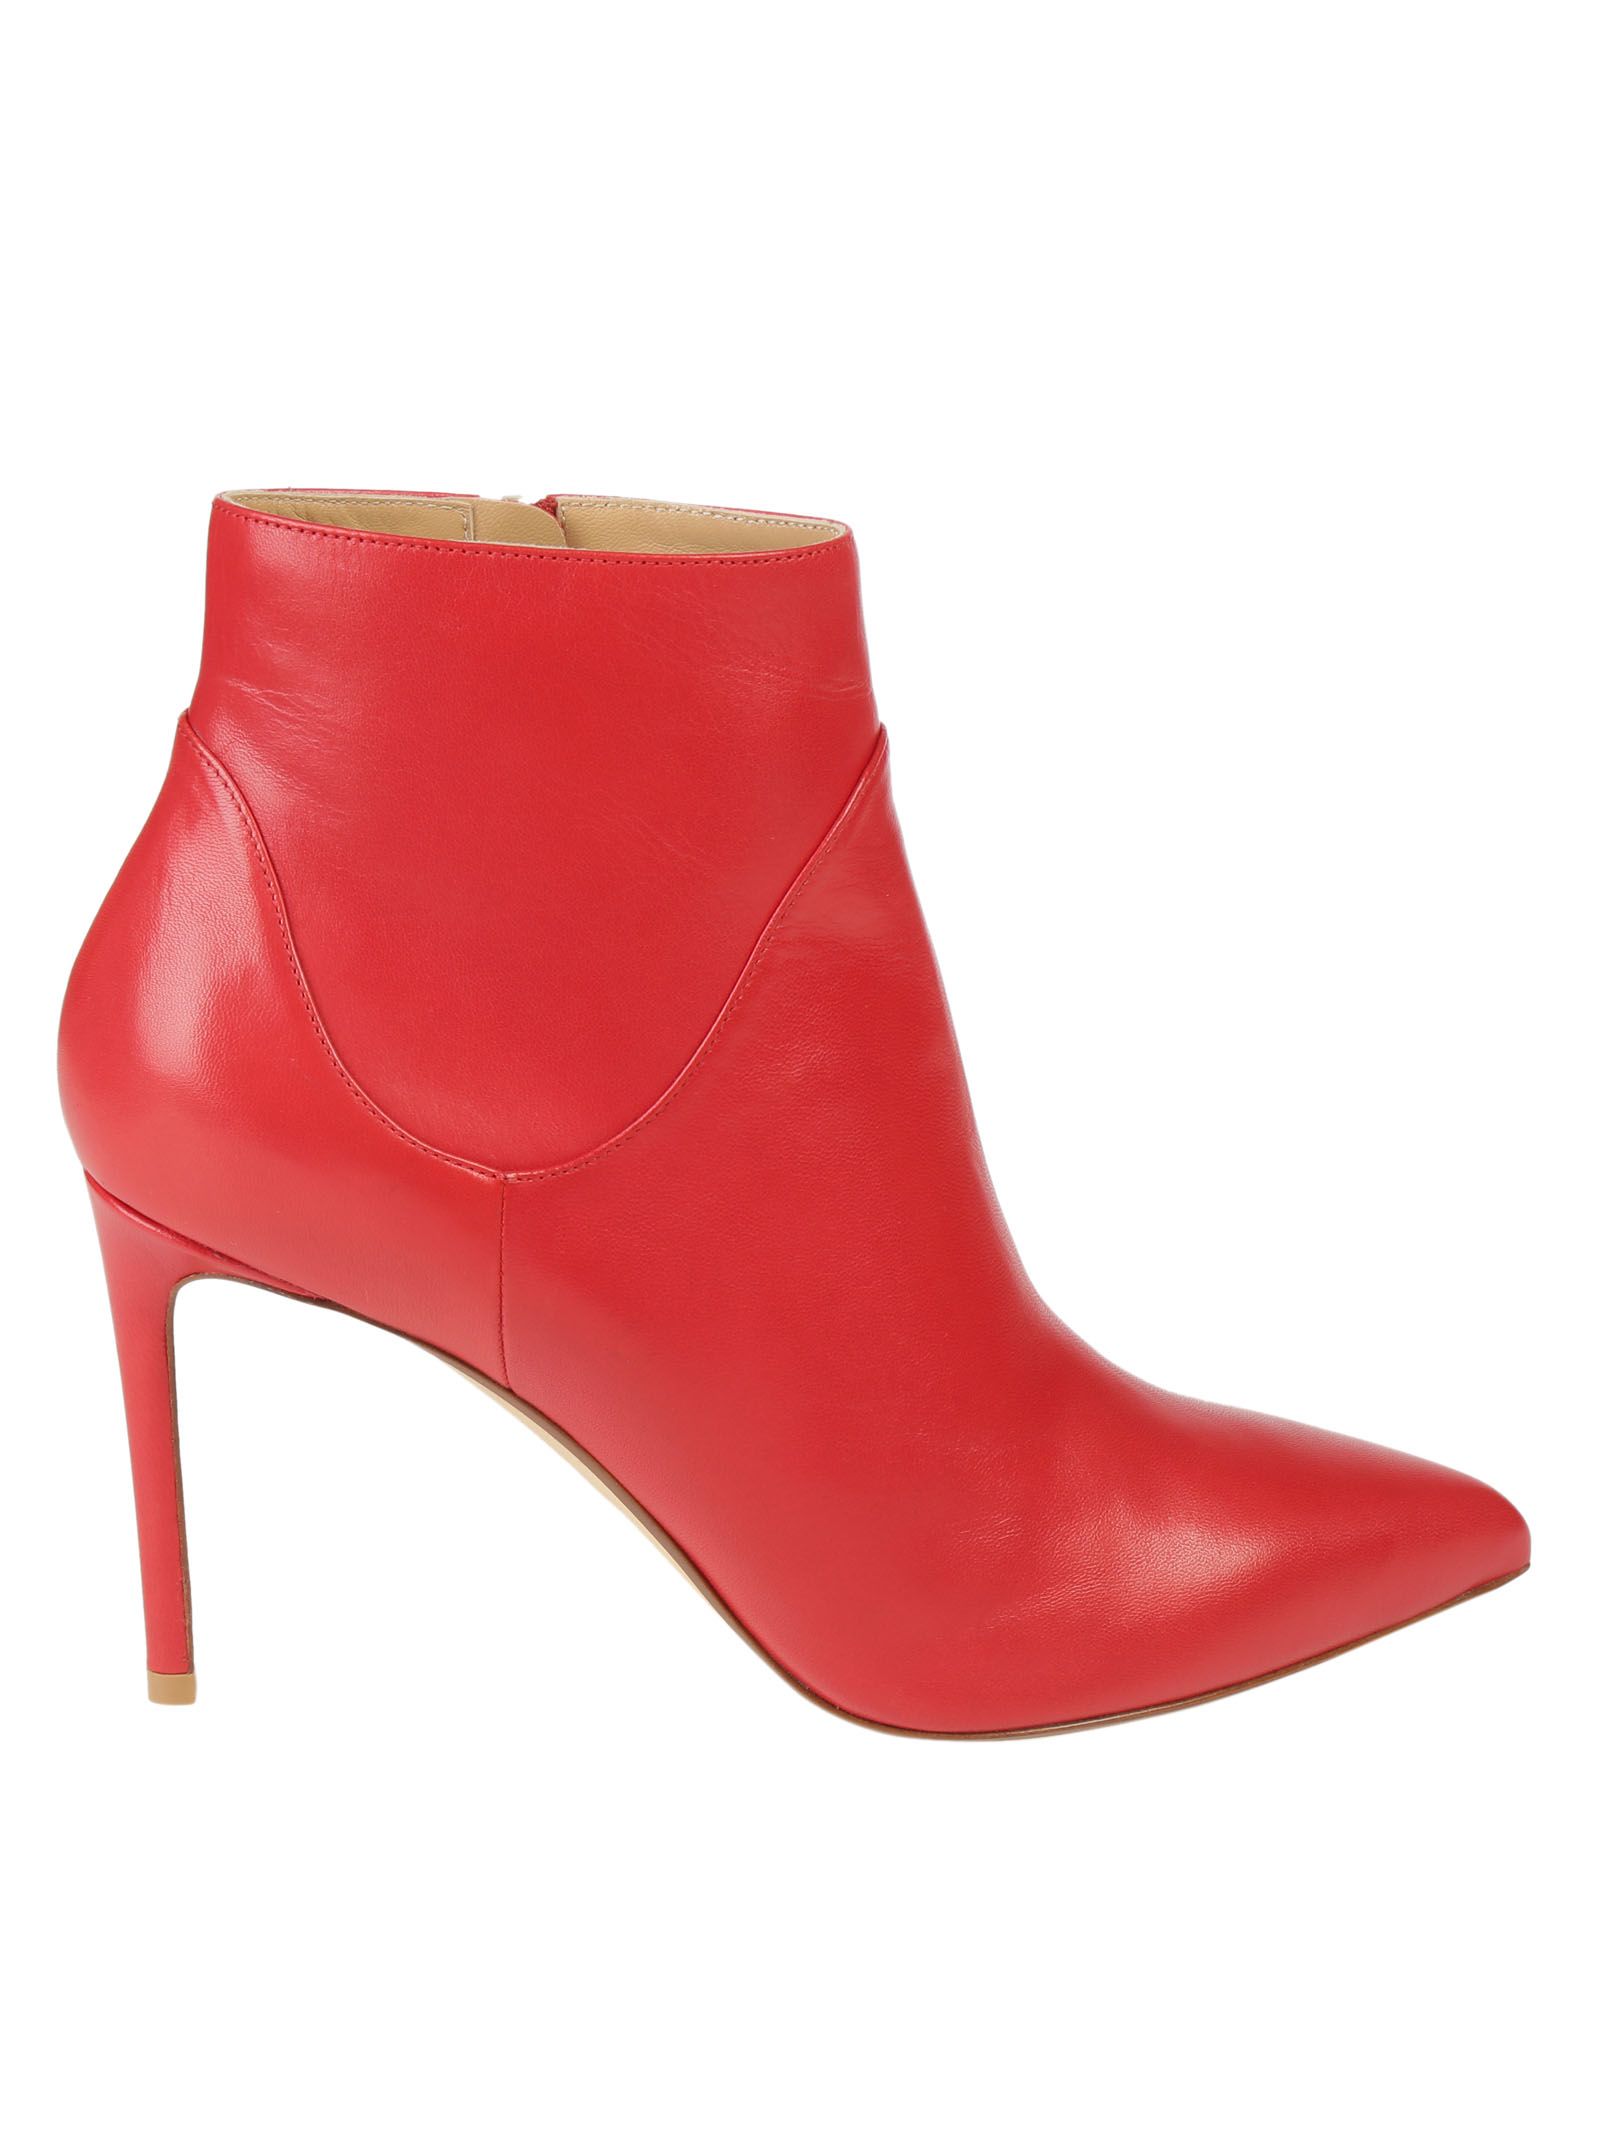 FRANCESCO RUSSO Classic Ankle Boots in Red | ModeSens